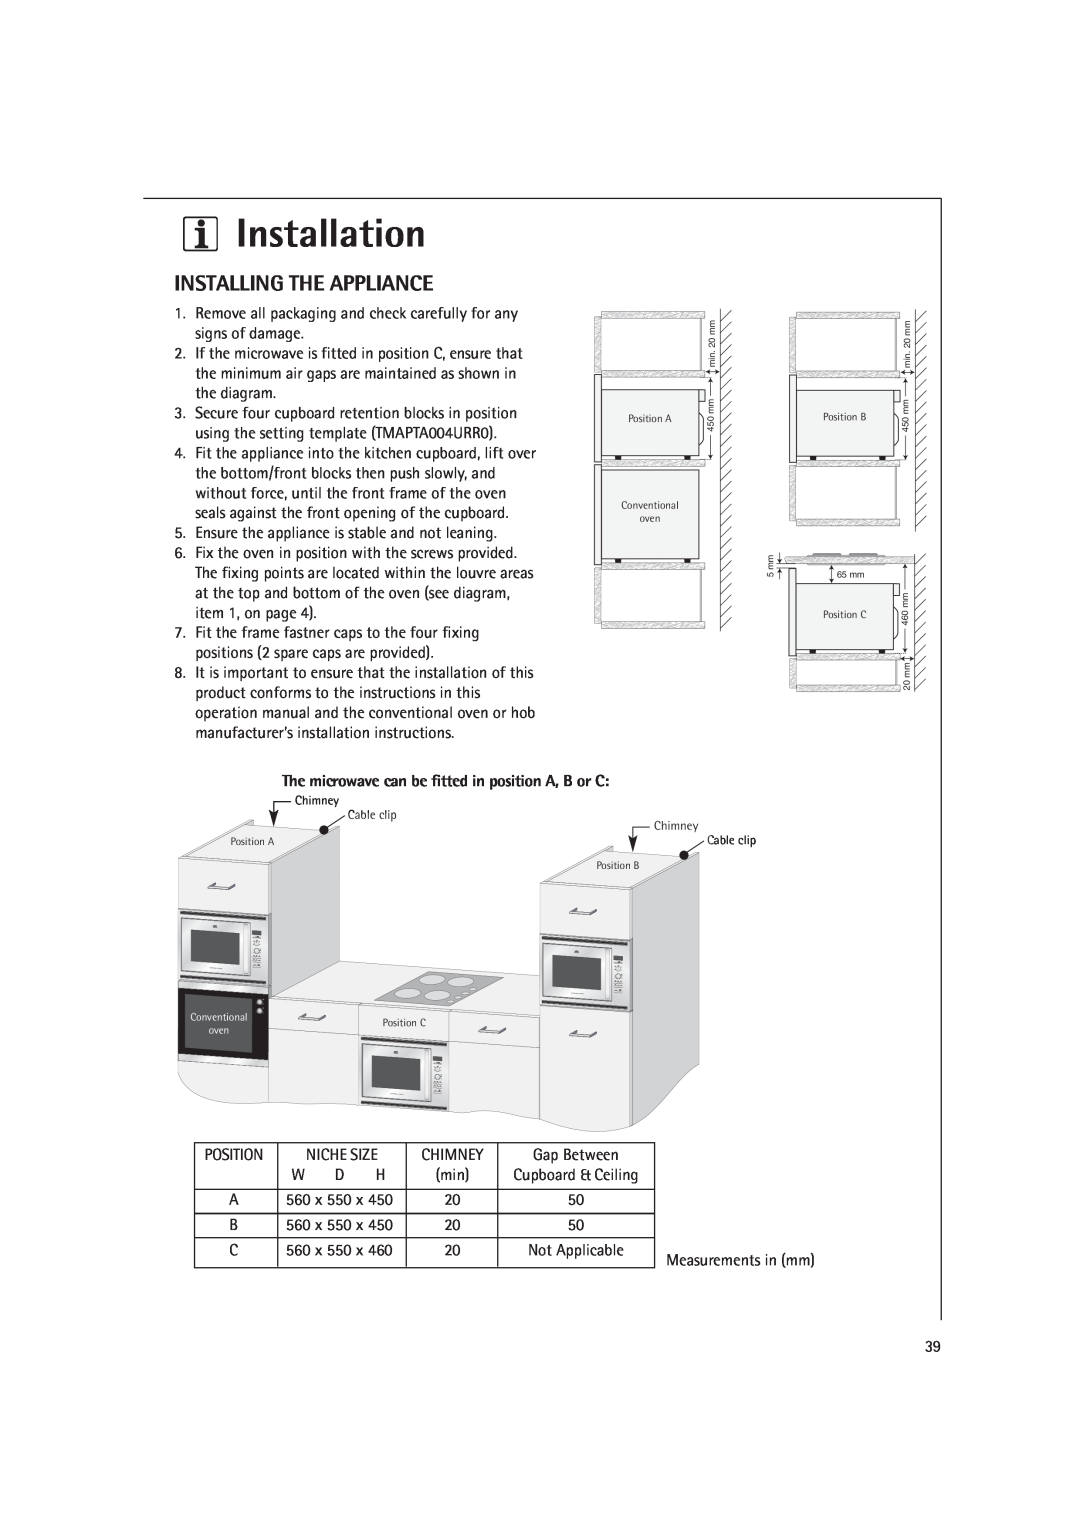 Electrolux MCC4060E Installation, Installing The Appliance, The microwave can be fitted in position A, B or C 